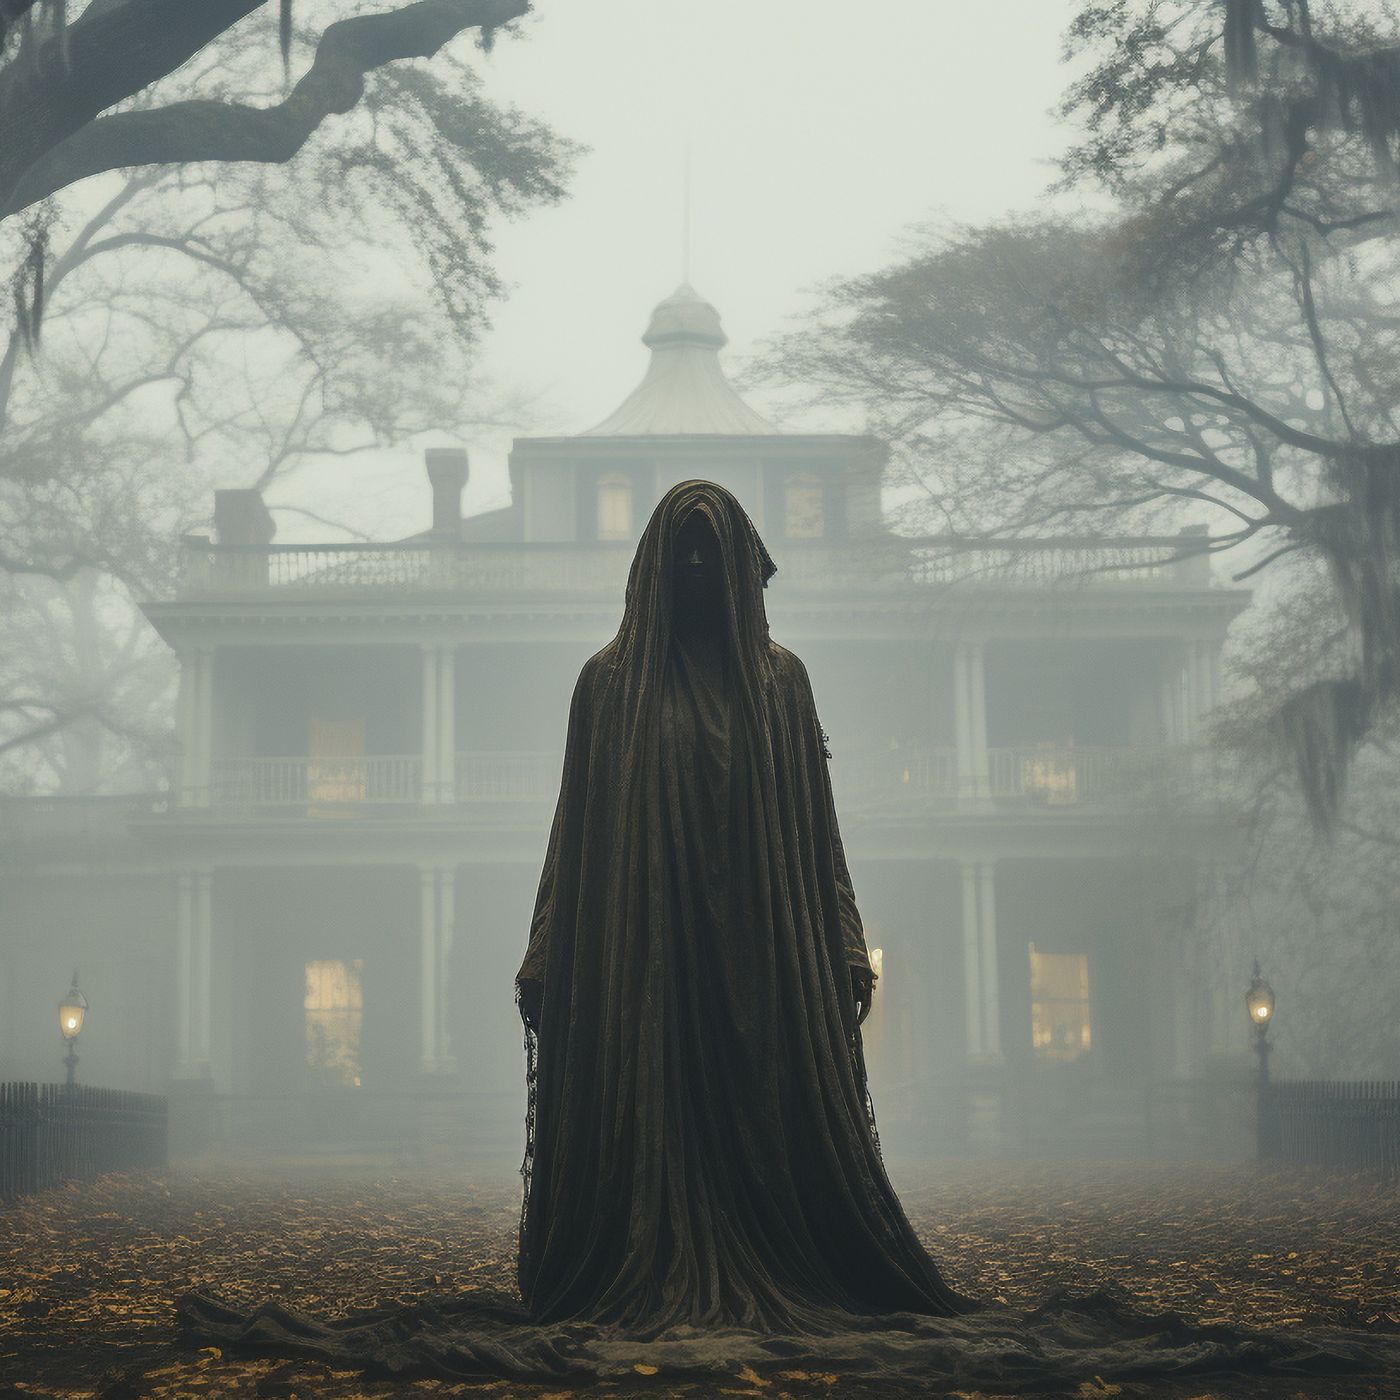 S9: The Haunted Myrtles Plantation